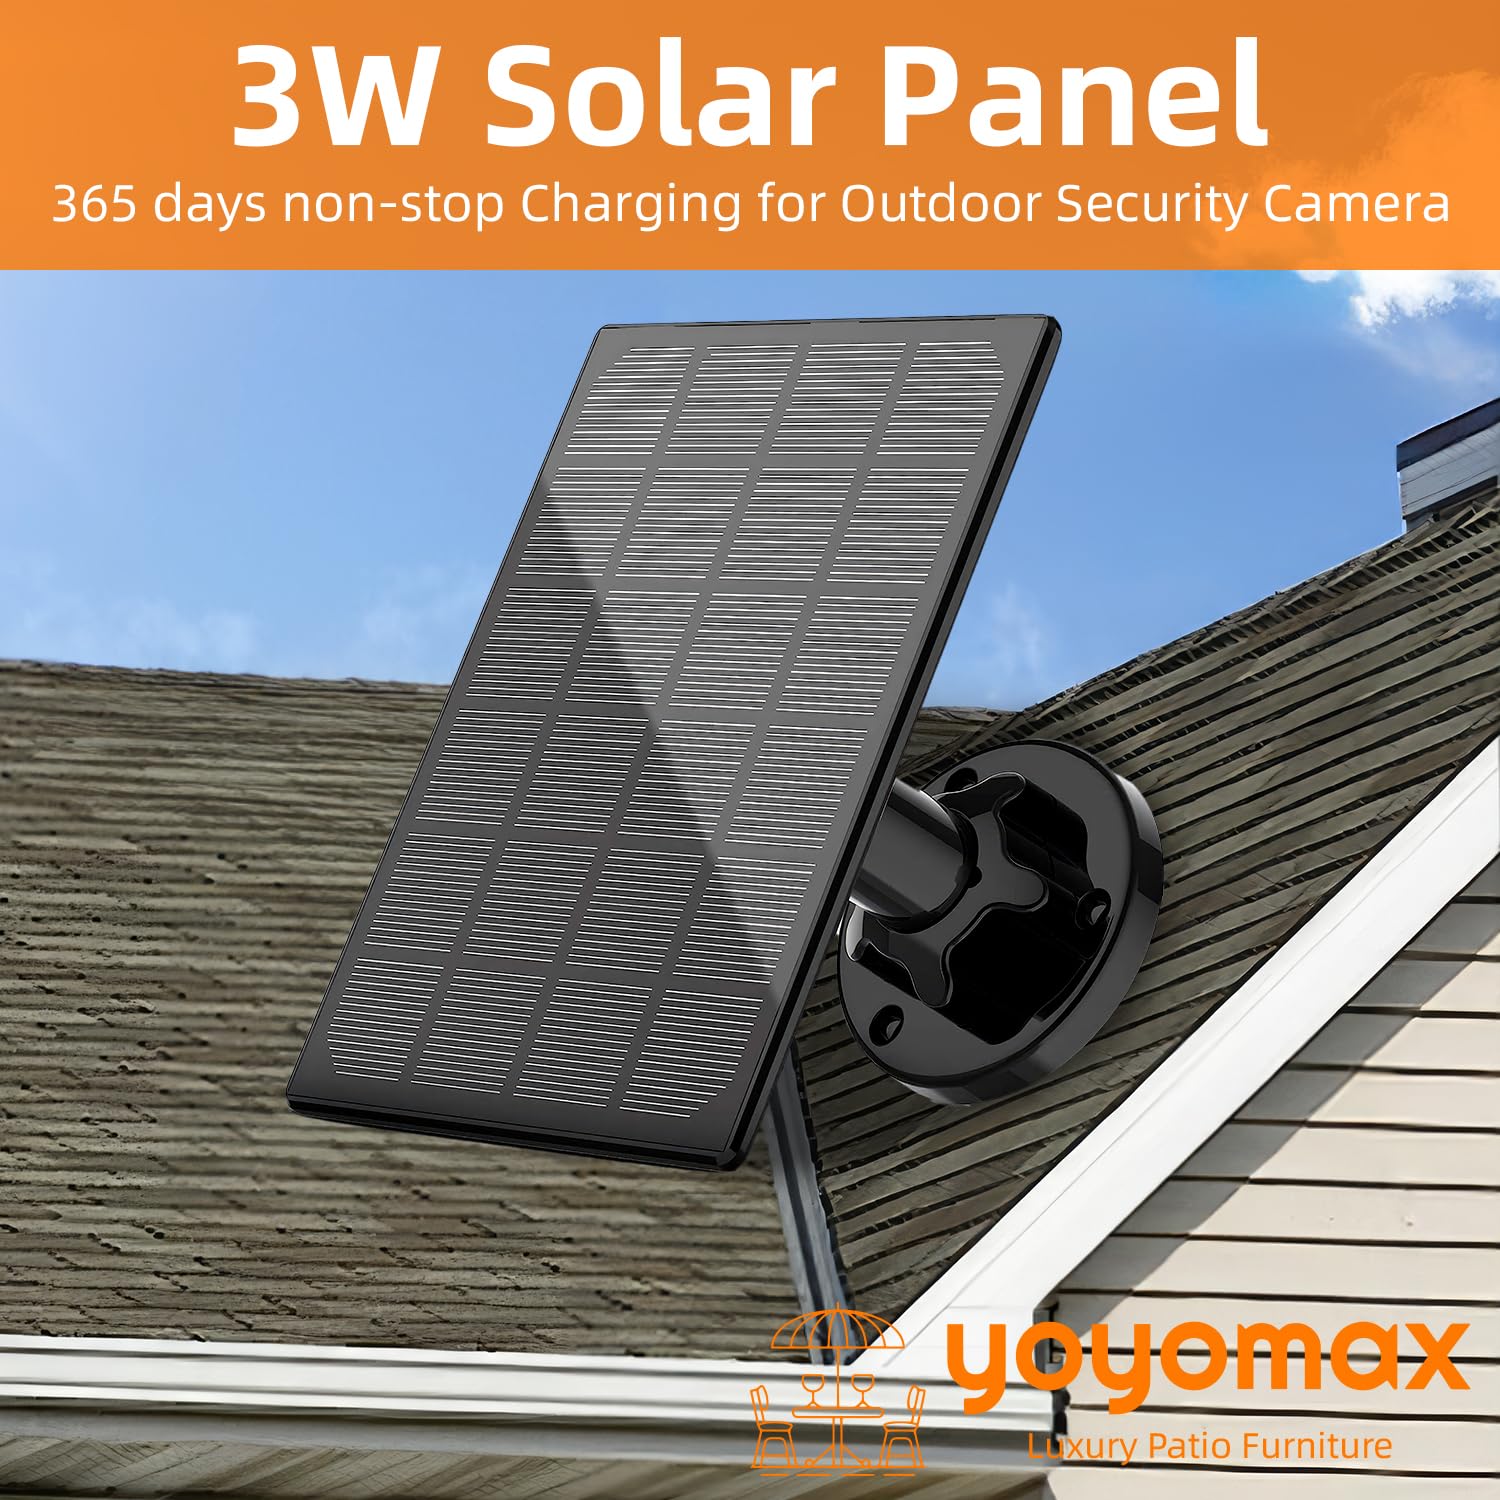 yoyomax 3W Solar Panel for Wireless Outdoor Security Camera, Compatible with DC 5V Micro USB Rechargeable Battery Powered Surveillance Cam, IP65 Weatherproof Continuous Solar Power for Camera